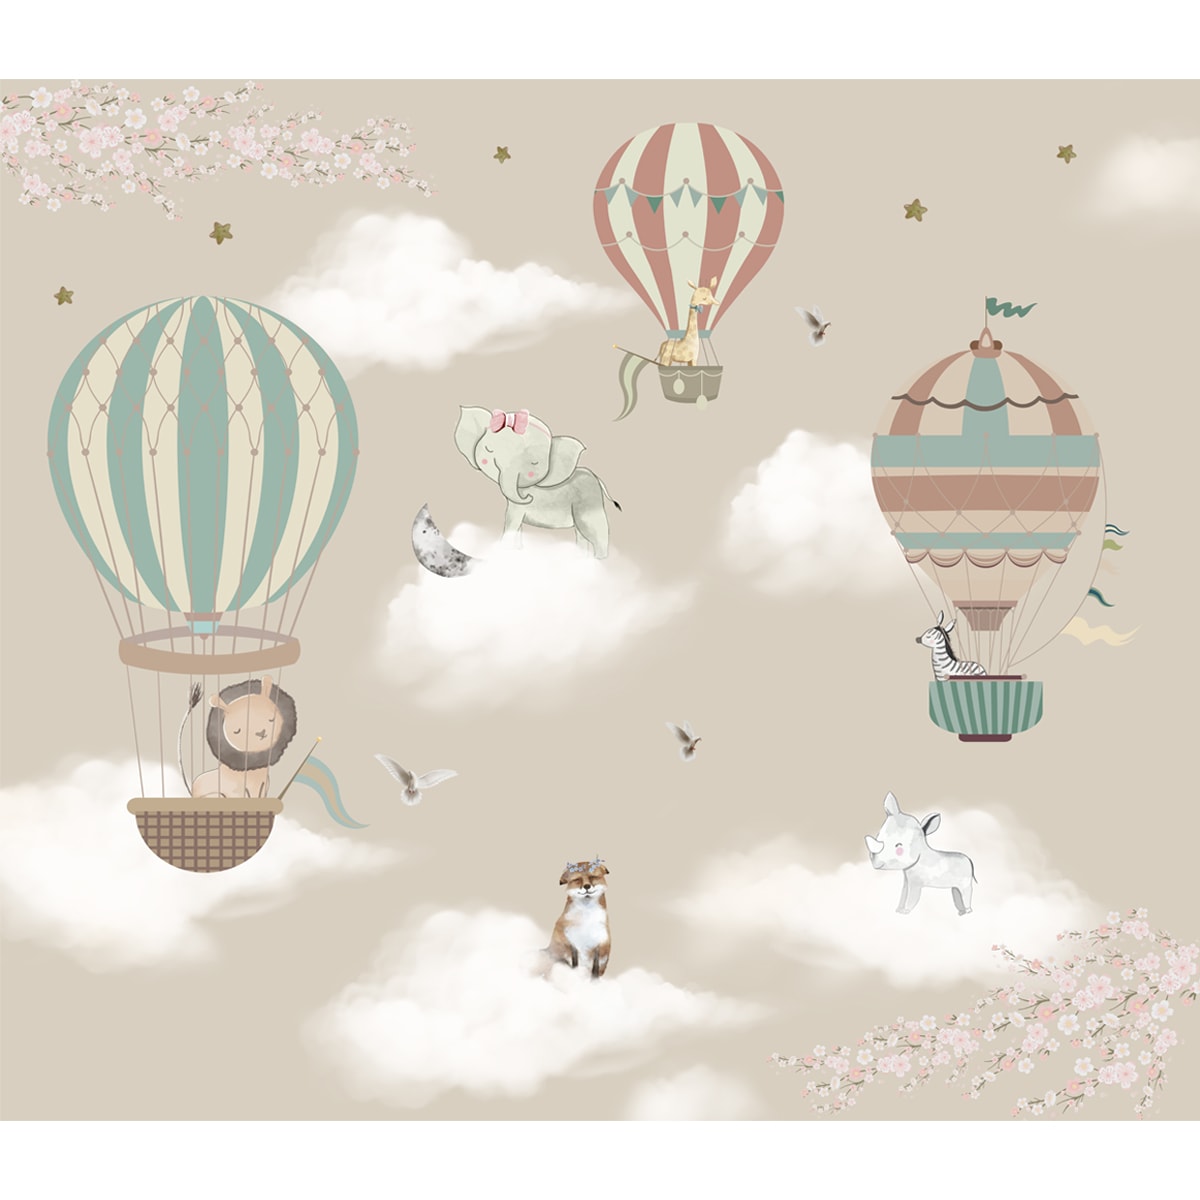 Hot Air Balloons with Animals Wallpaper for Kids Room Walls, Kids Wall Designs